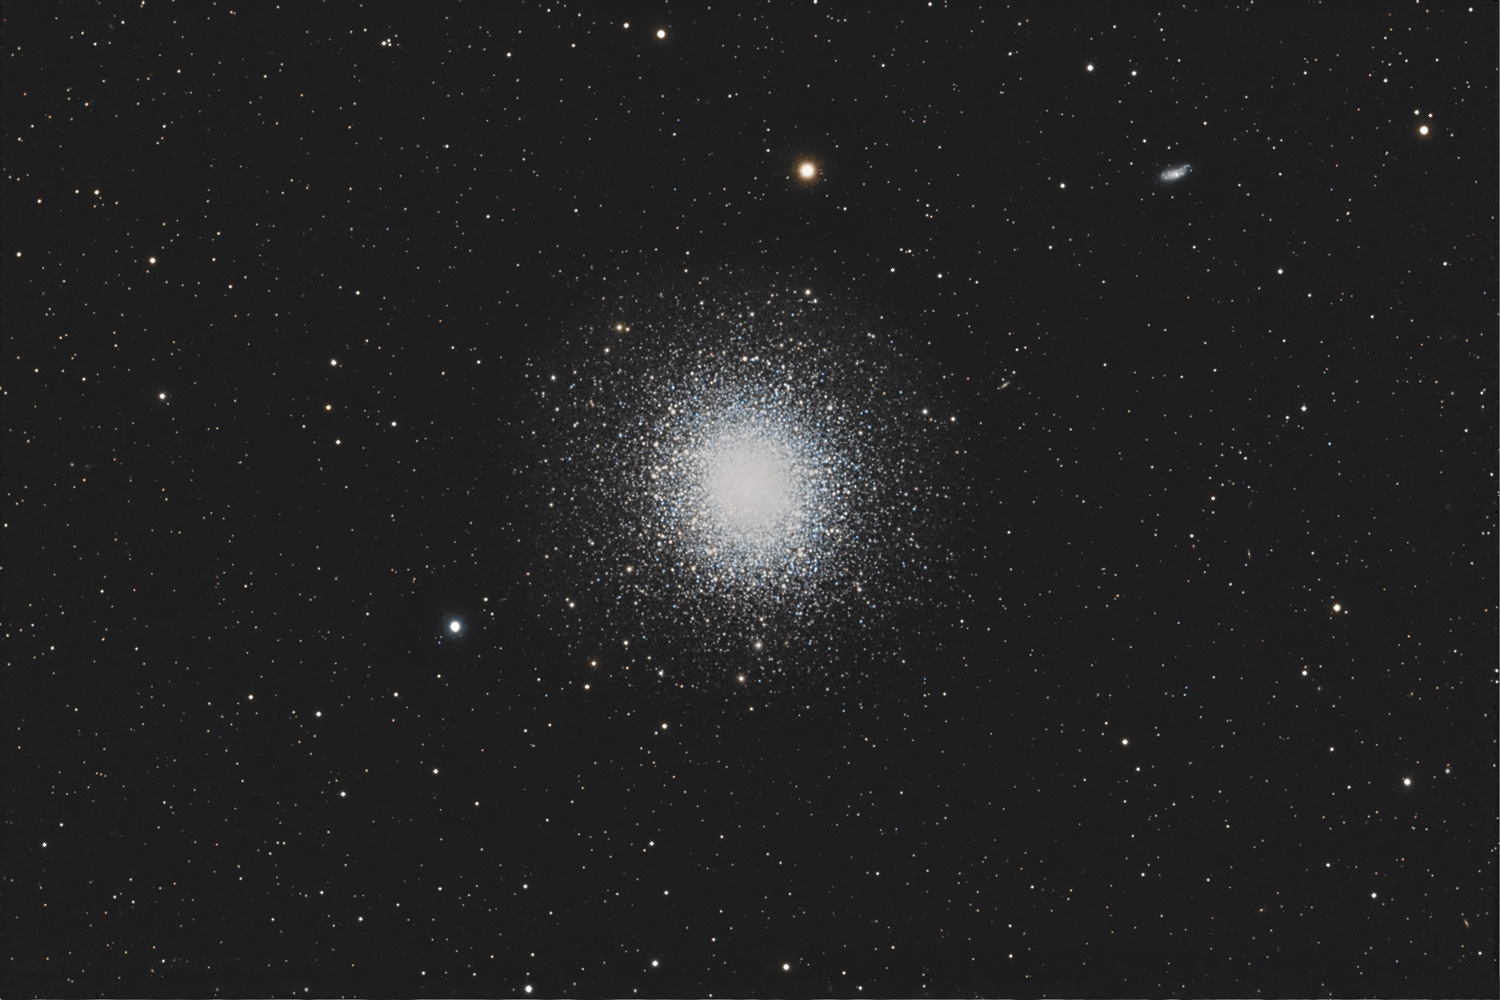 M13 "The Hercules Cluster" Large